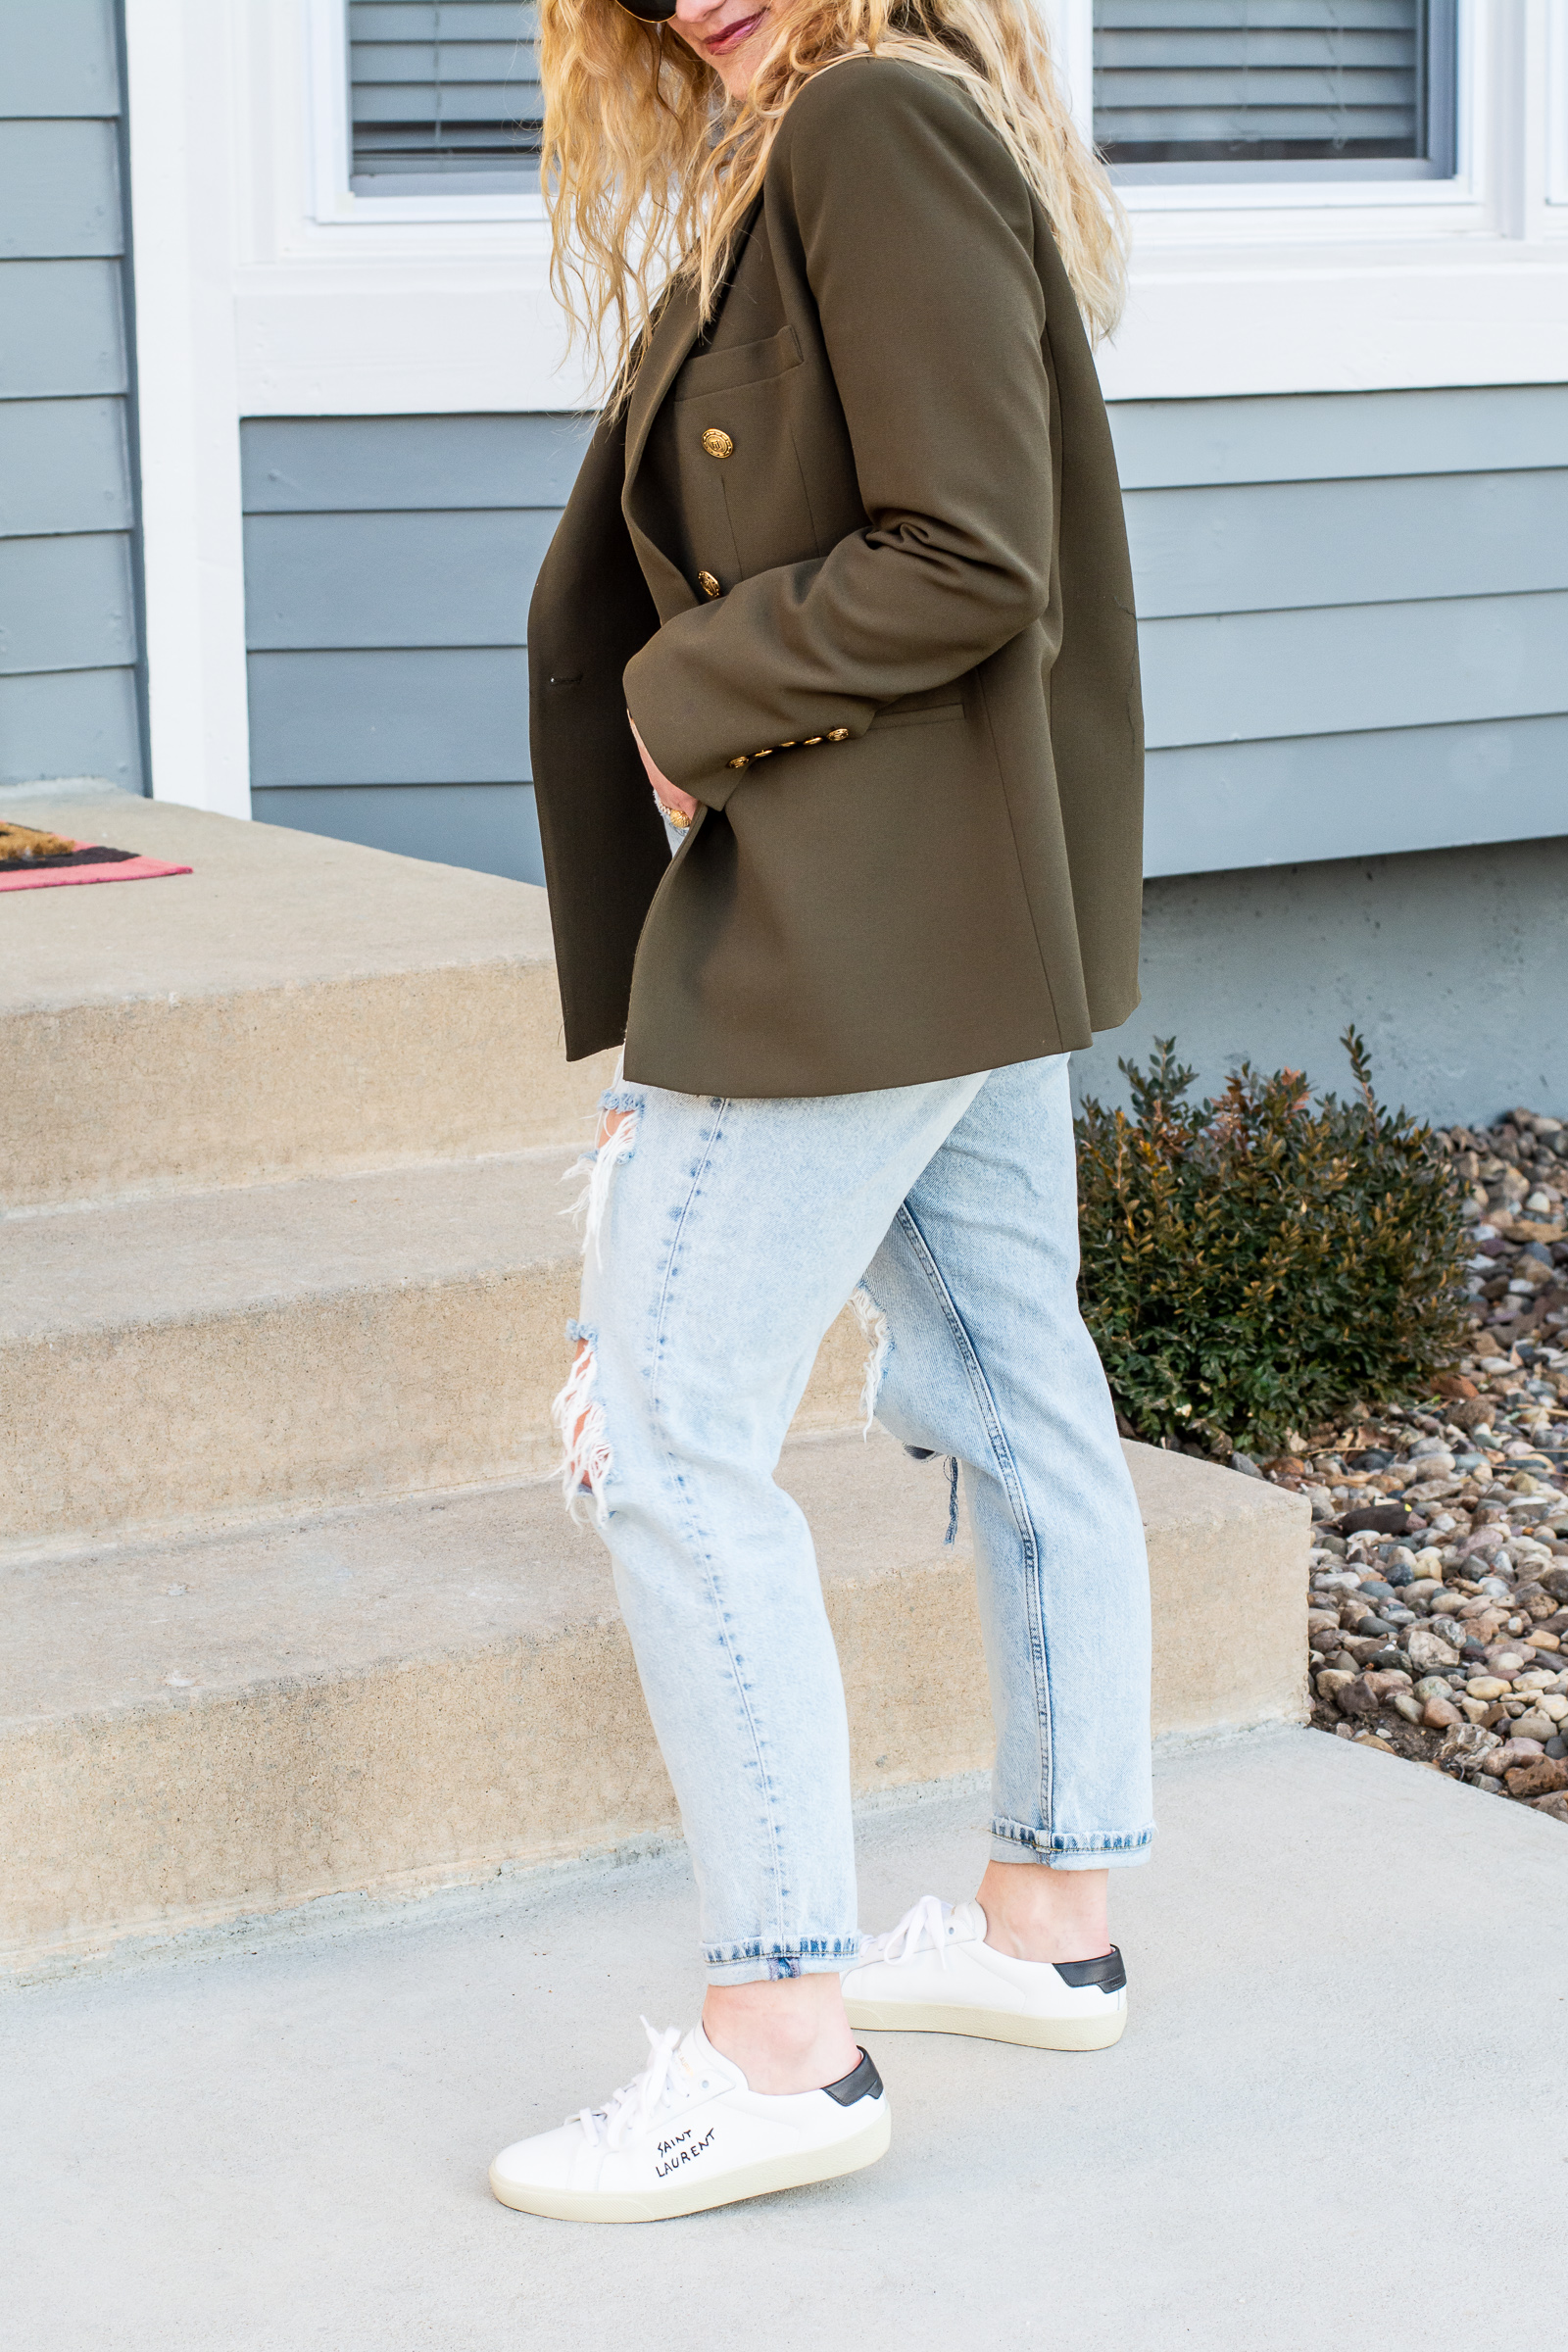 Olive Green Blazer with a Leopard Turtleneck and Sneakers. | LSR